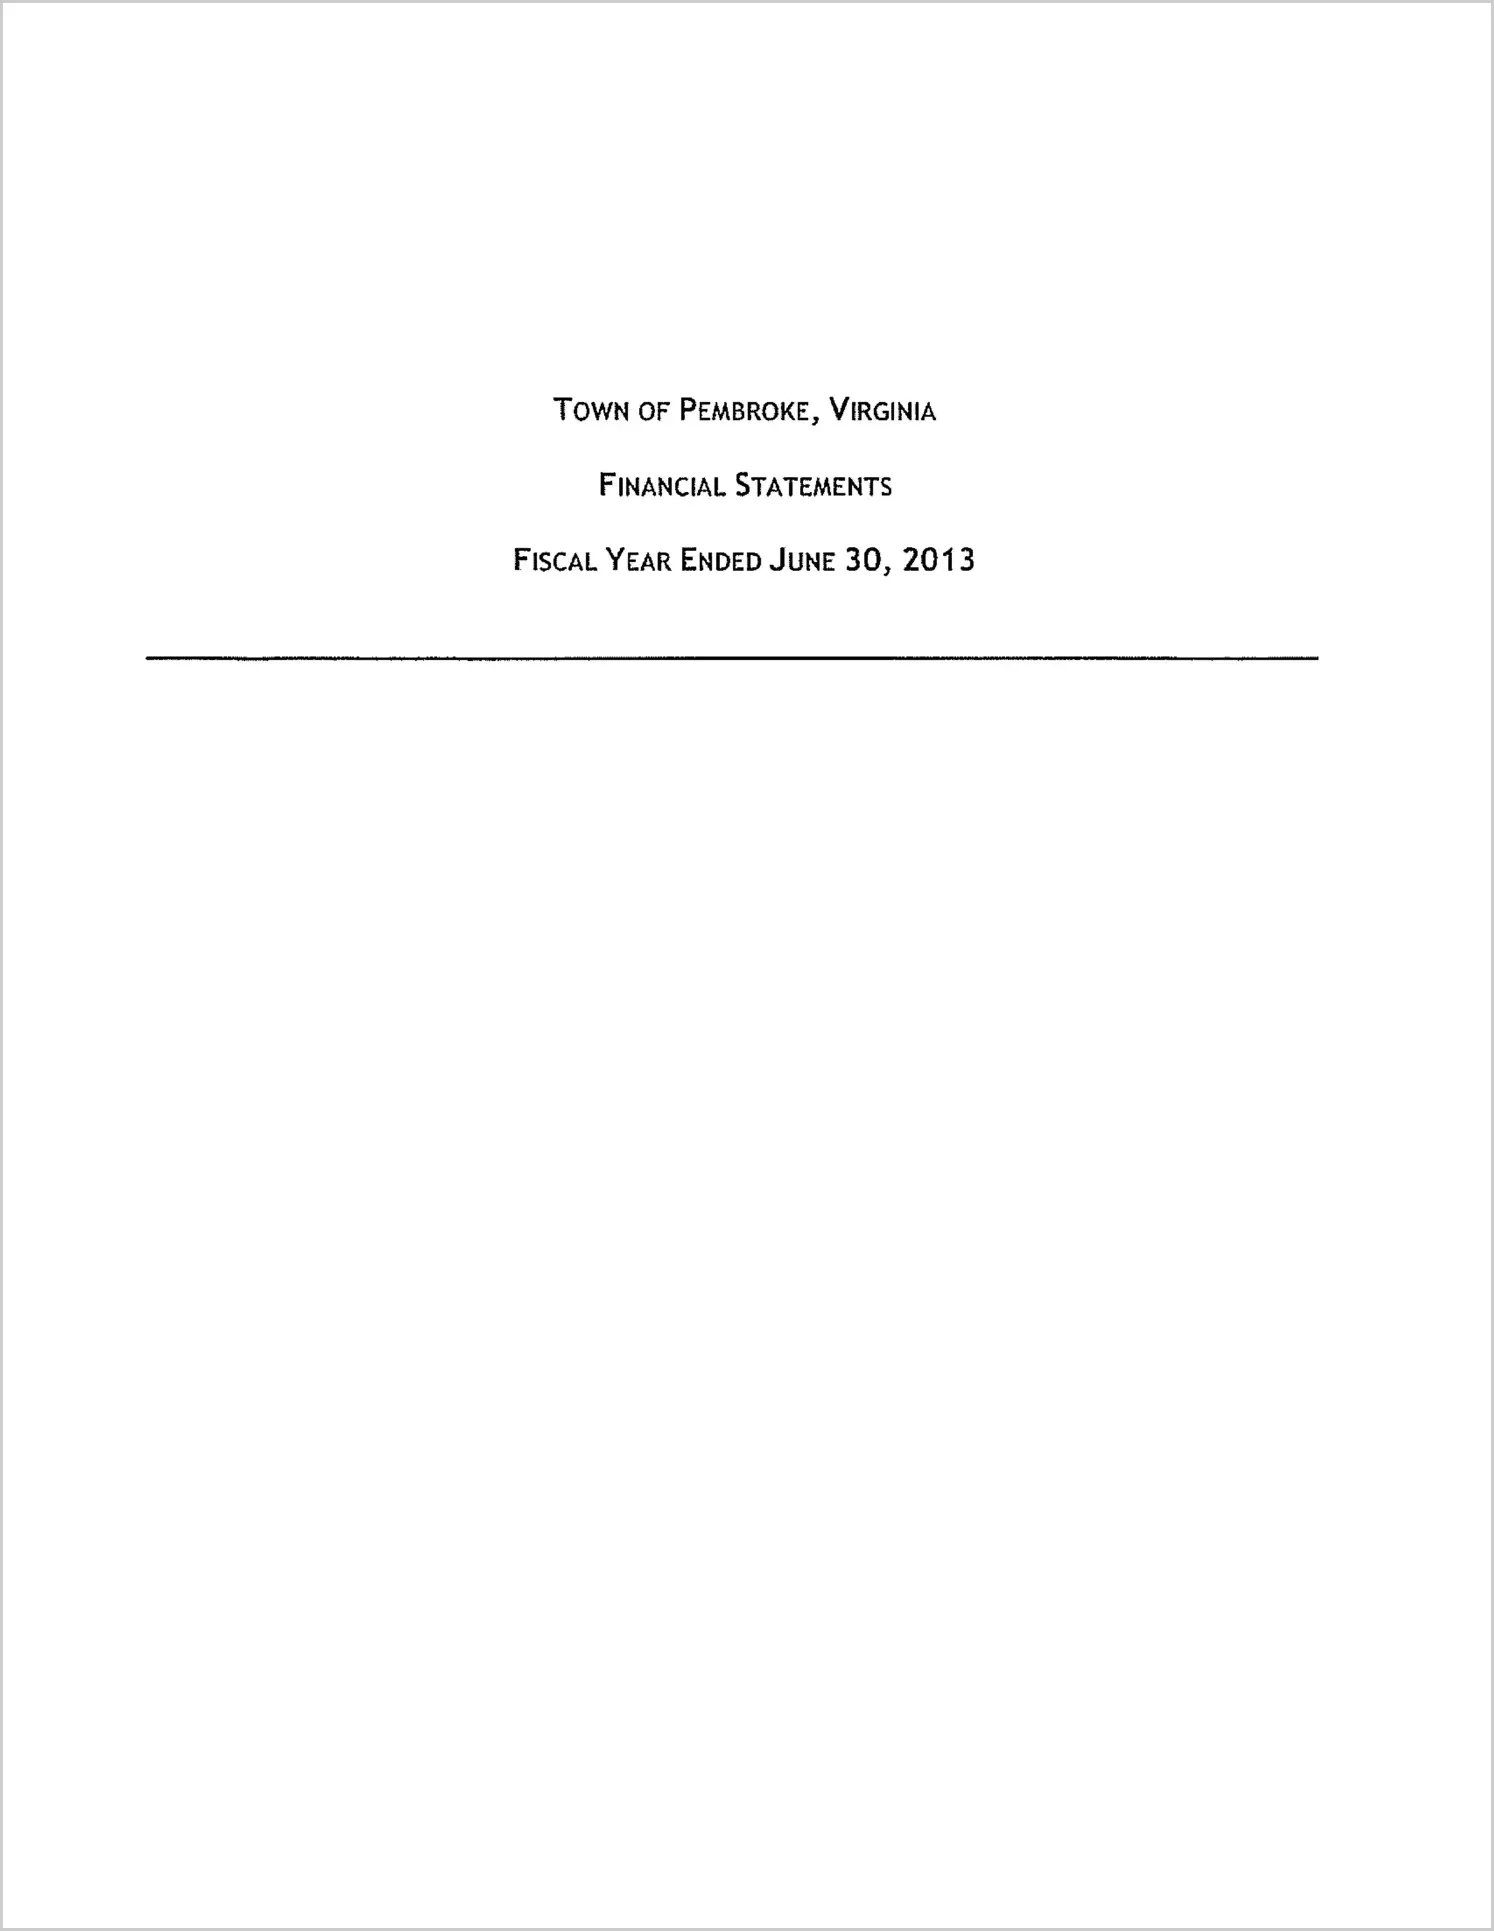 2013 Annual Financial Report for Town of Pembroke